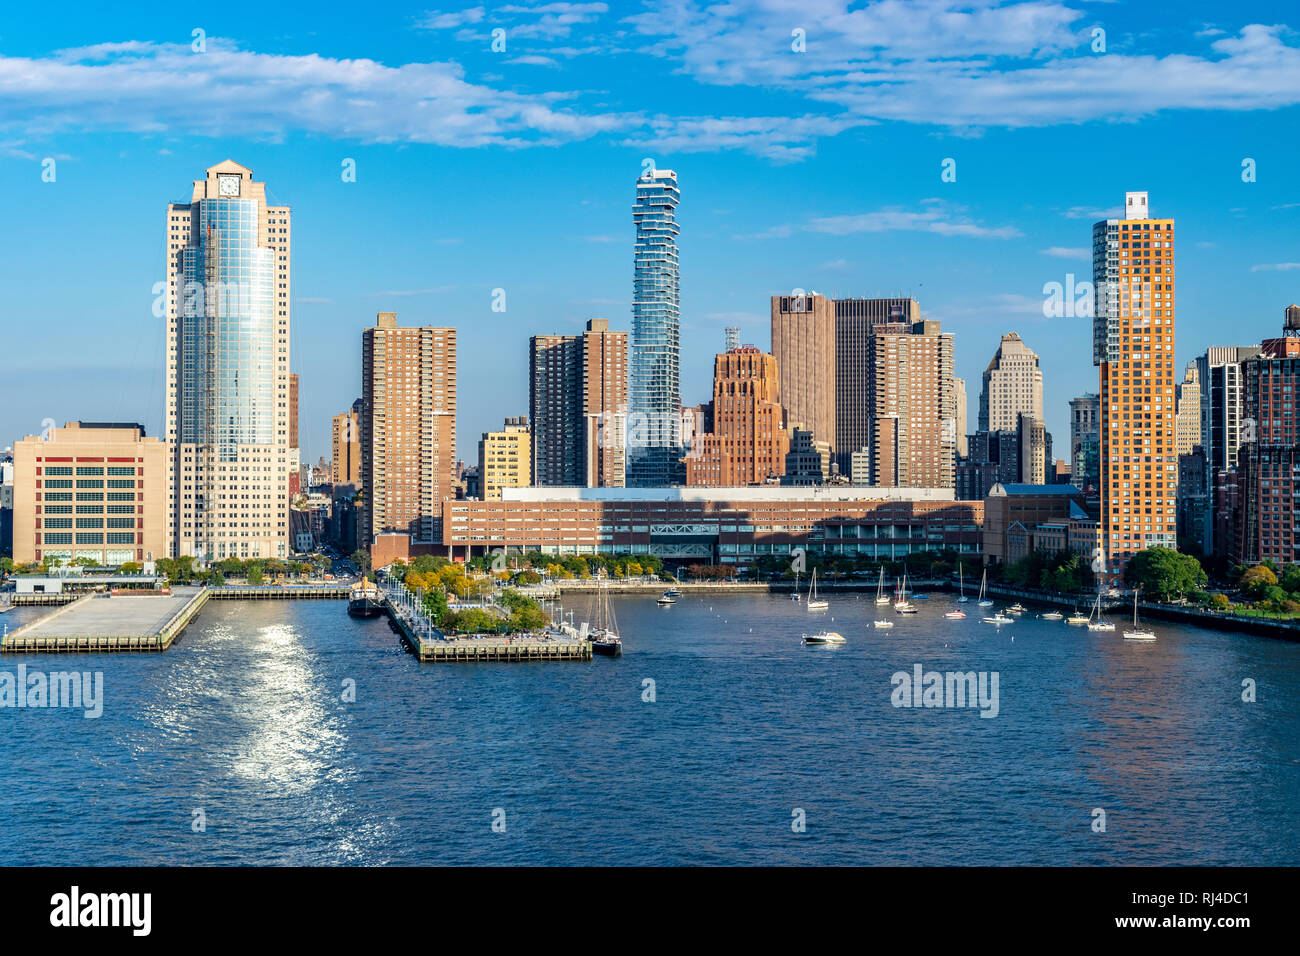 Lower Manhattan skyline in New York City from the Hudson River on a sunny Autumn evening with boats and yachts in the harbor. Stock Photo